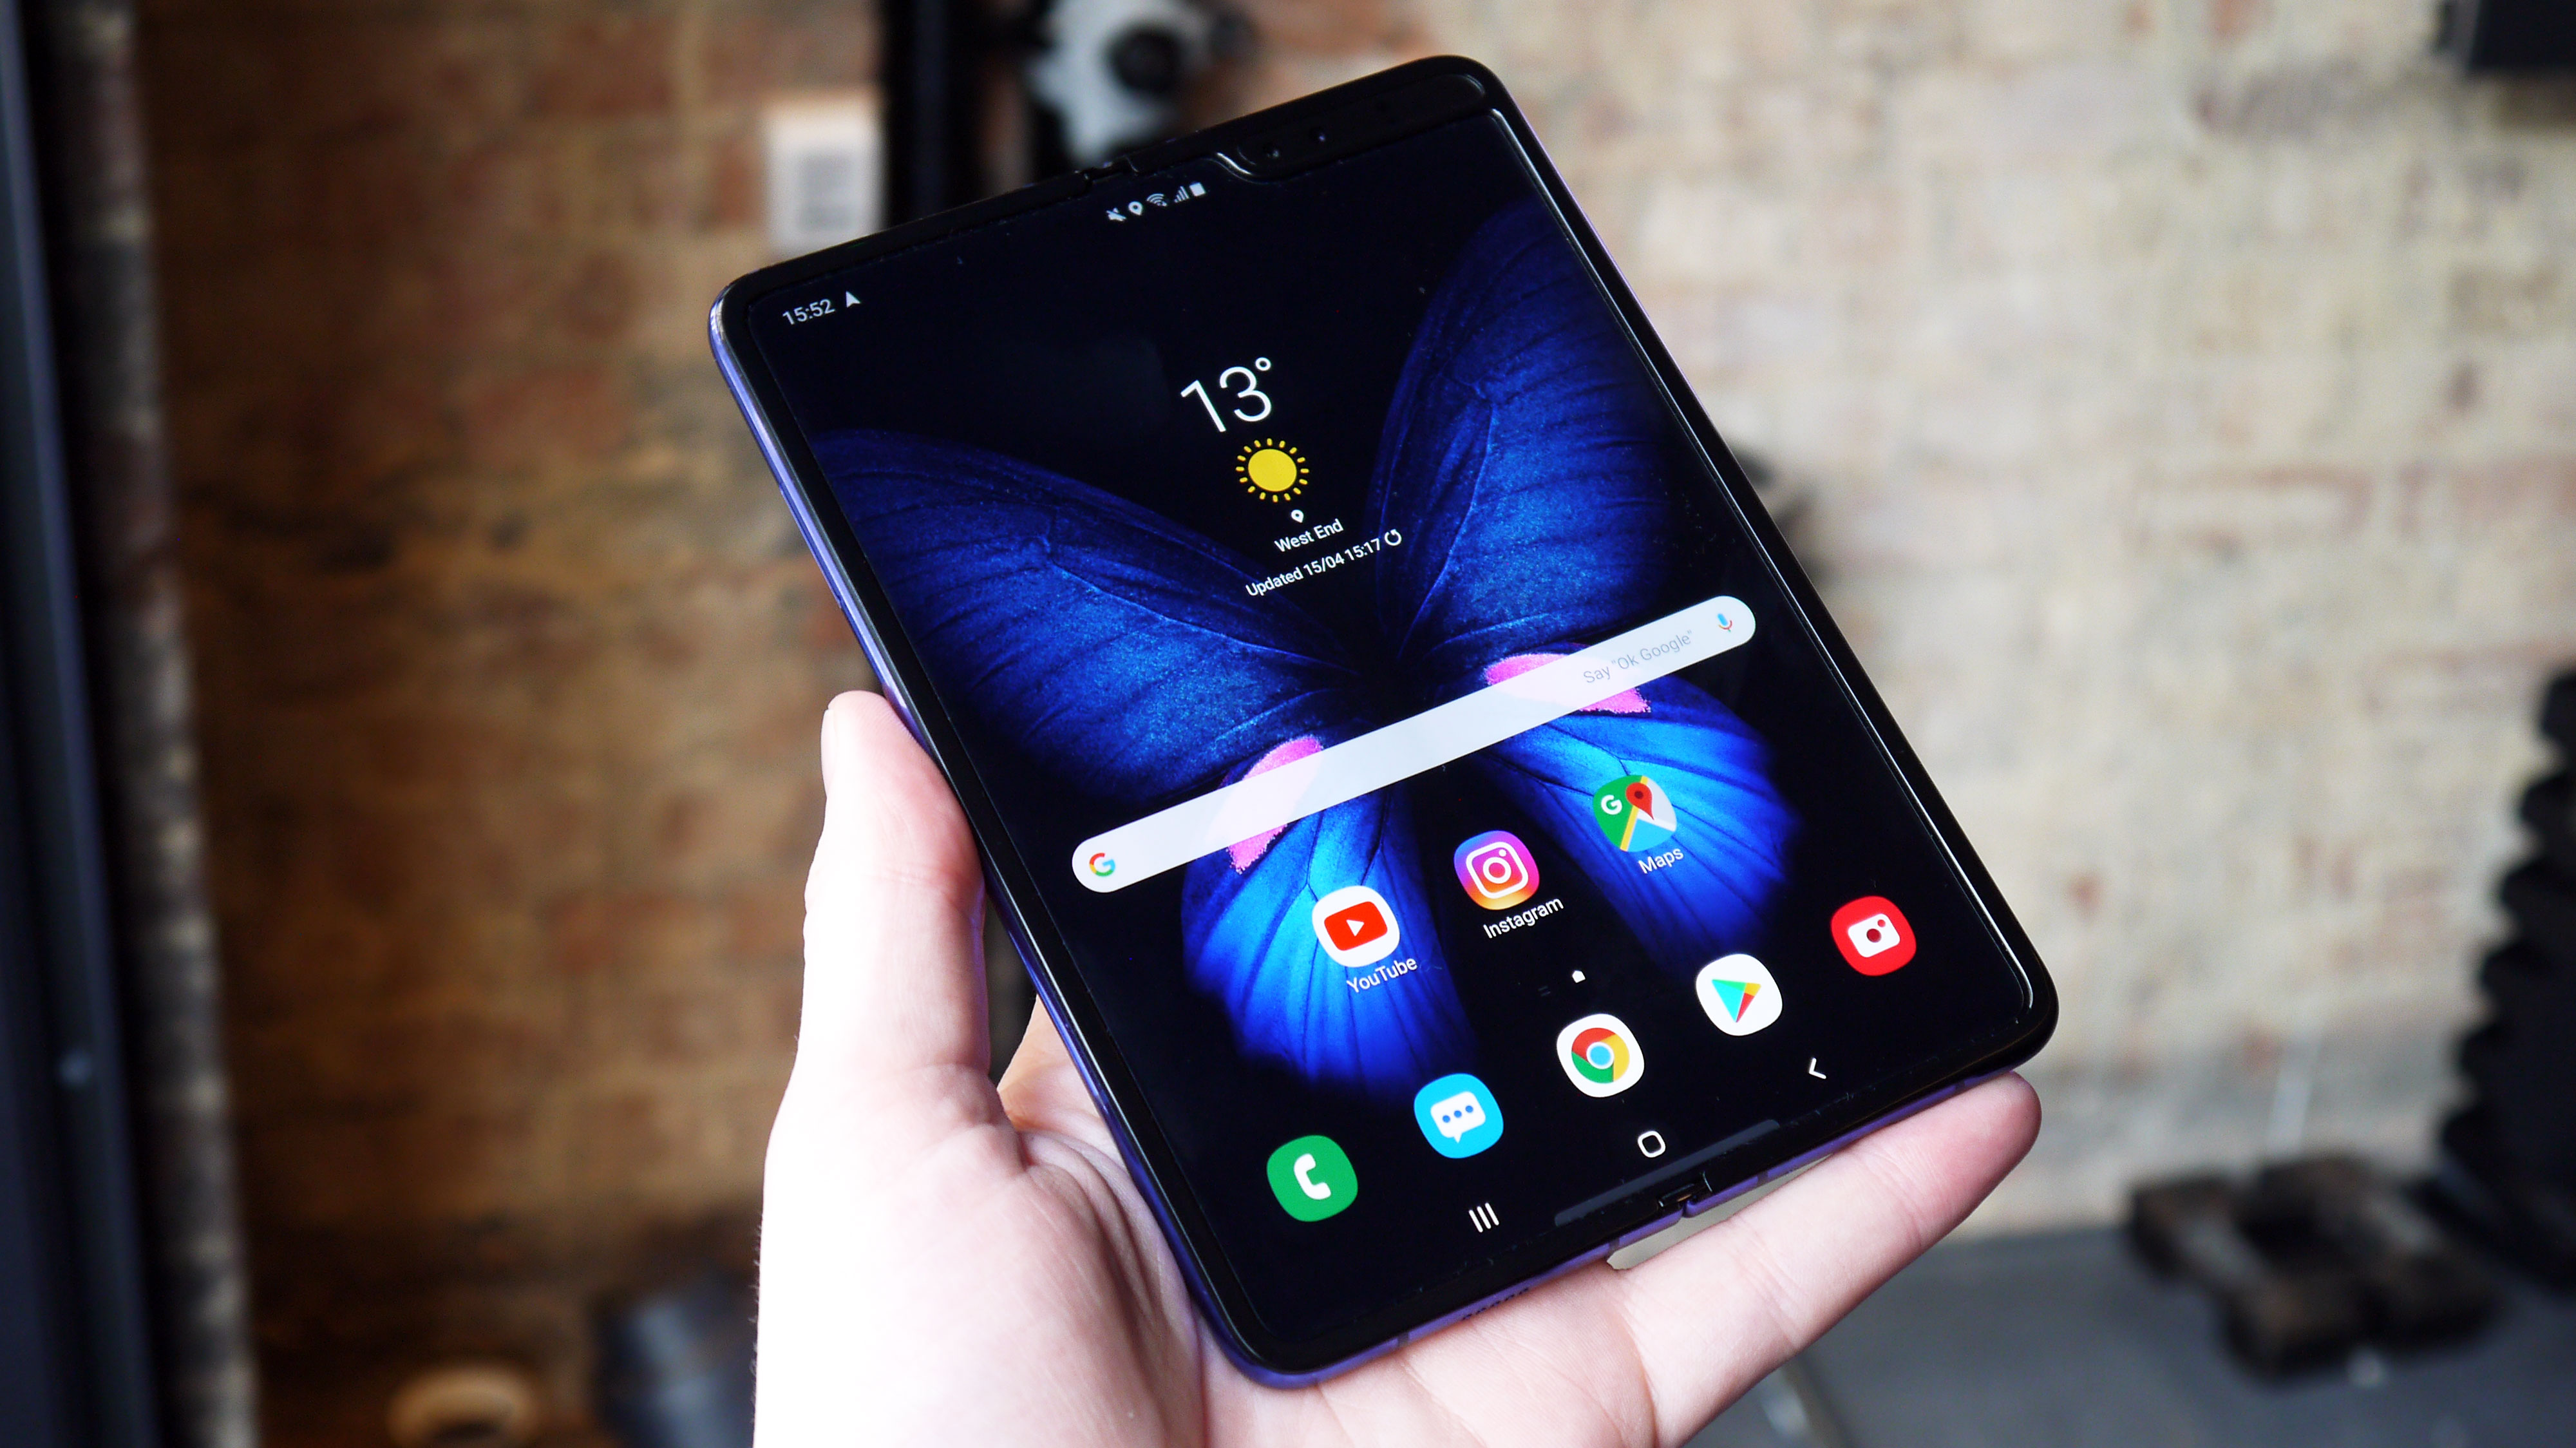 Samsung Galaxy Fold is now available in the USA